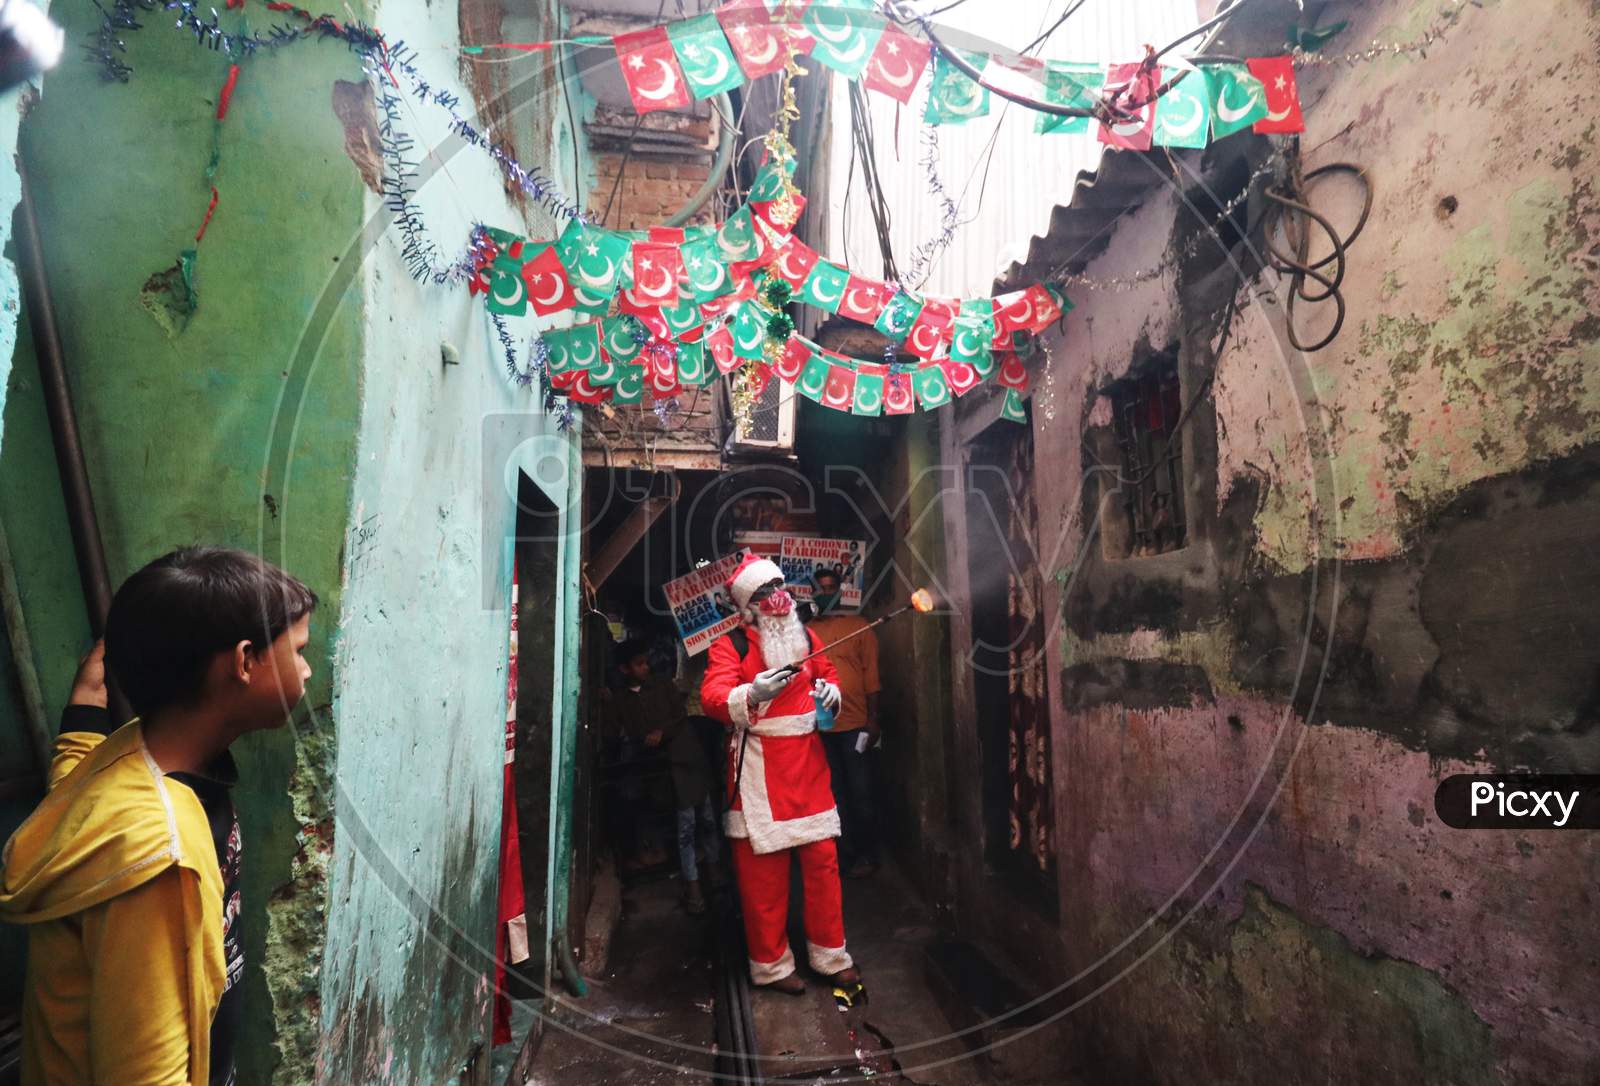 A man wearing a Santa Claus costume sanitizes the entrance of a house inside a slum, amidst the spread of the coronavirus disease (COVID-19), in Mumbai, India, December, 2020.